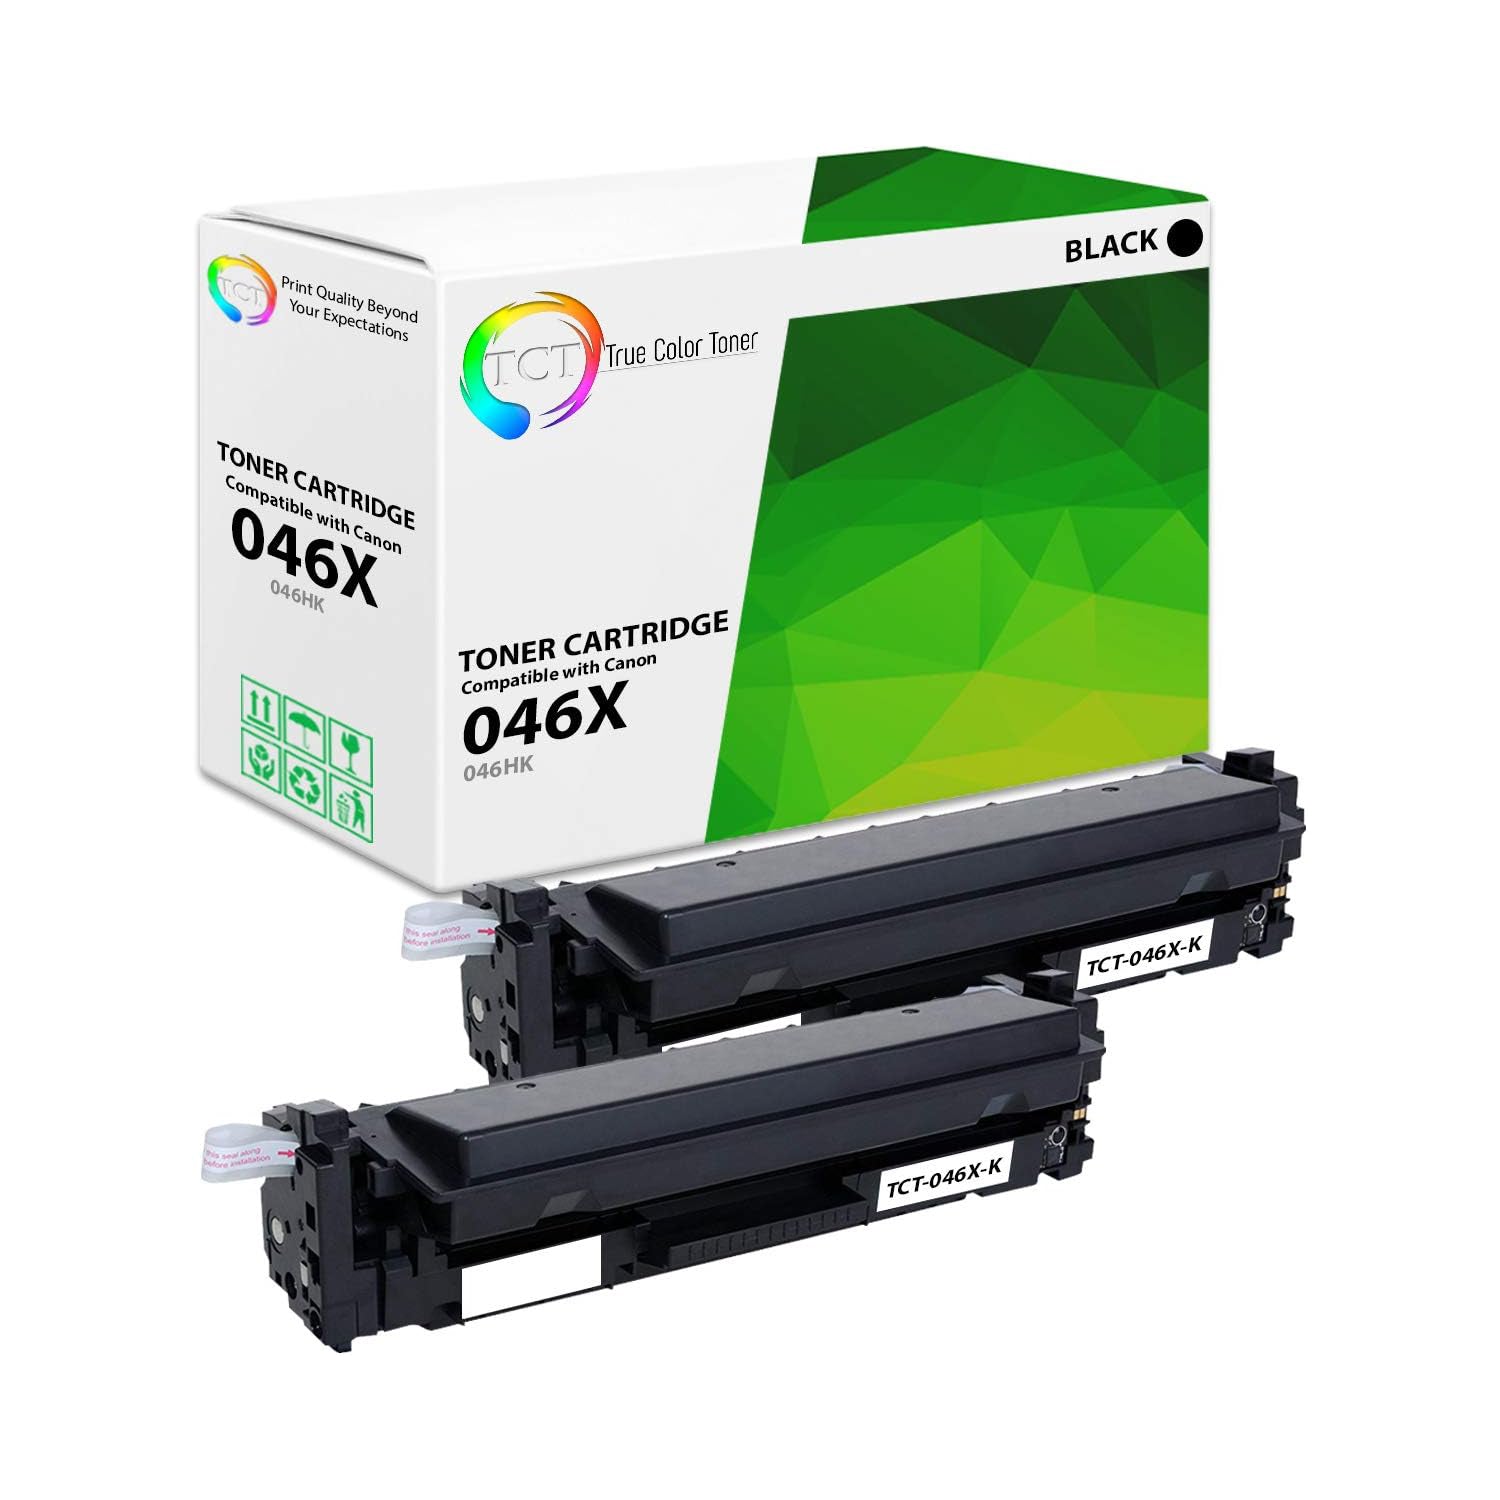 TCT Compatible High Yield Toner Cartridge Replacement for the Canon 046 Series - 2 Pack Black